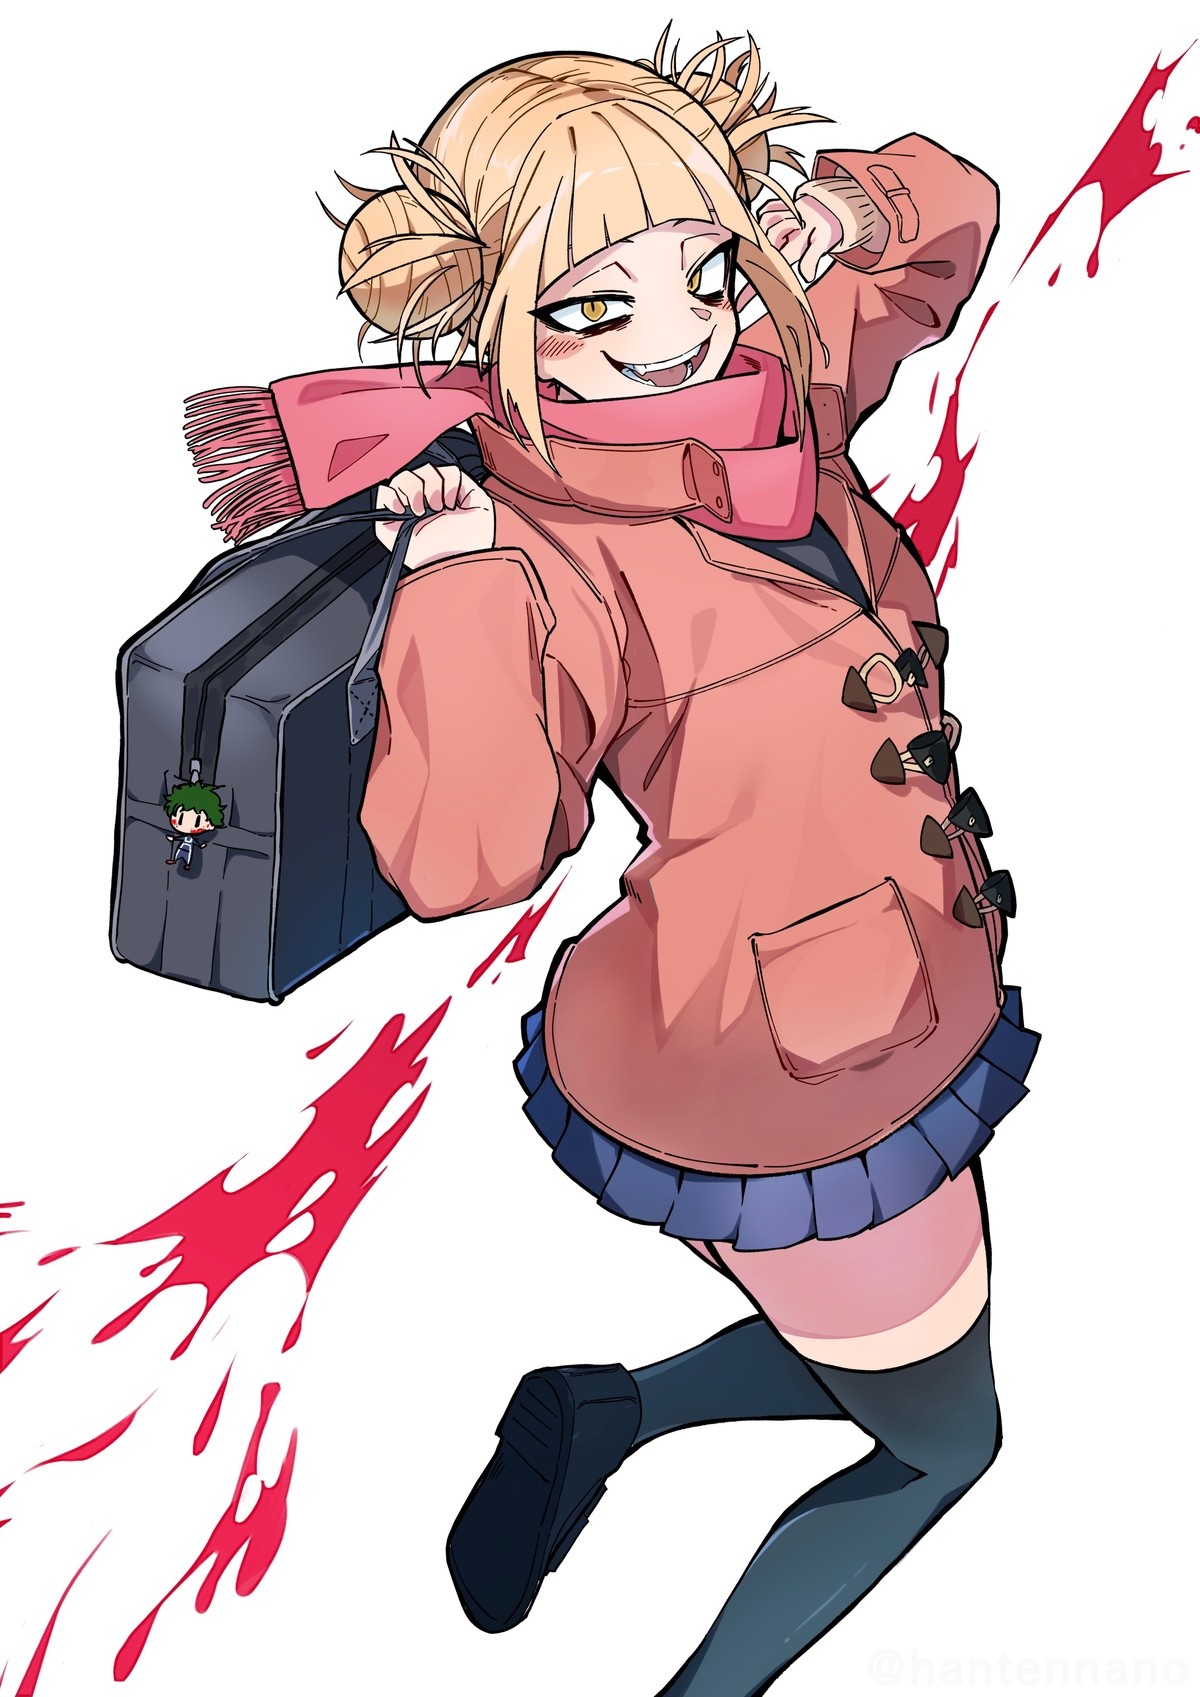 Daily Toga - 929: School Toga. join list: DailyToga (477 subs)Mention History Source: .. Oh right, BnHA releases today. Thanks for reminding me.